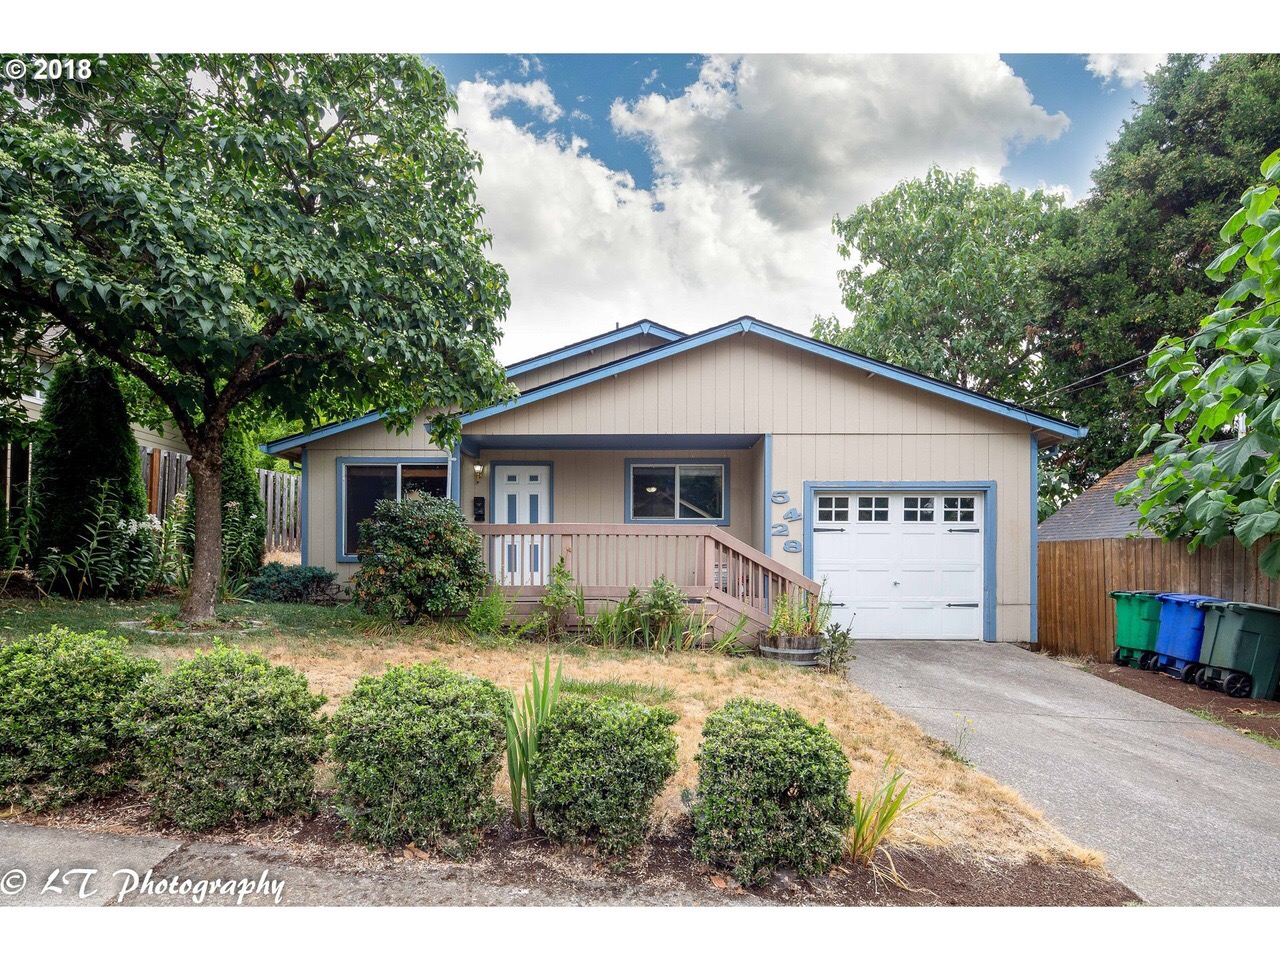 A VA Loan for the Win! Just Sold in Lents